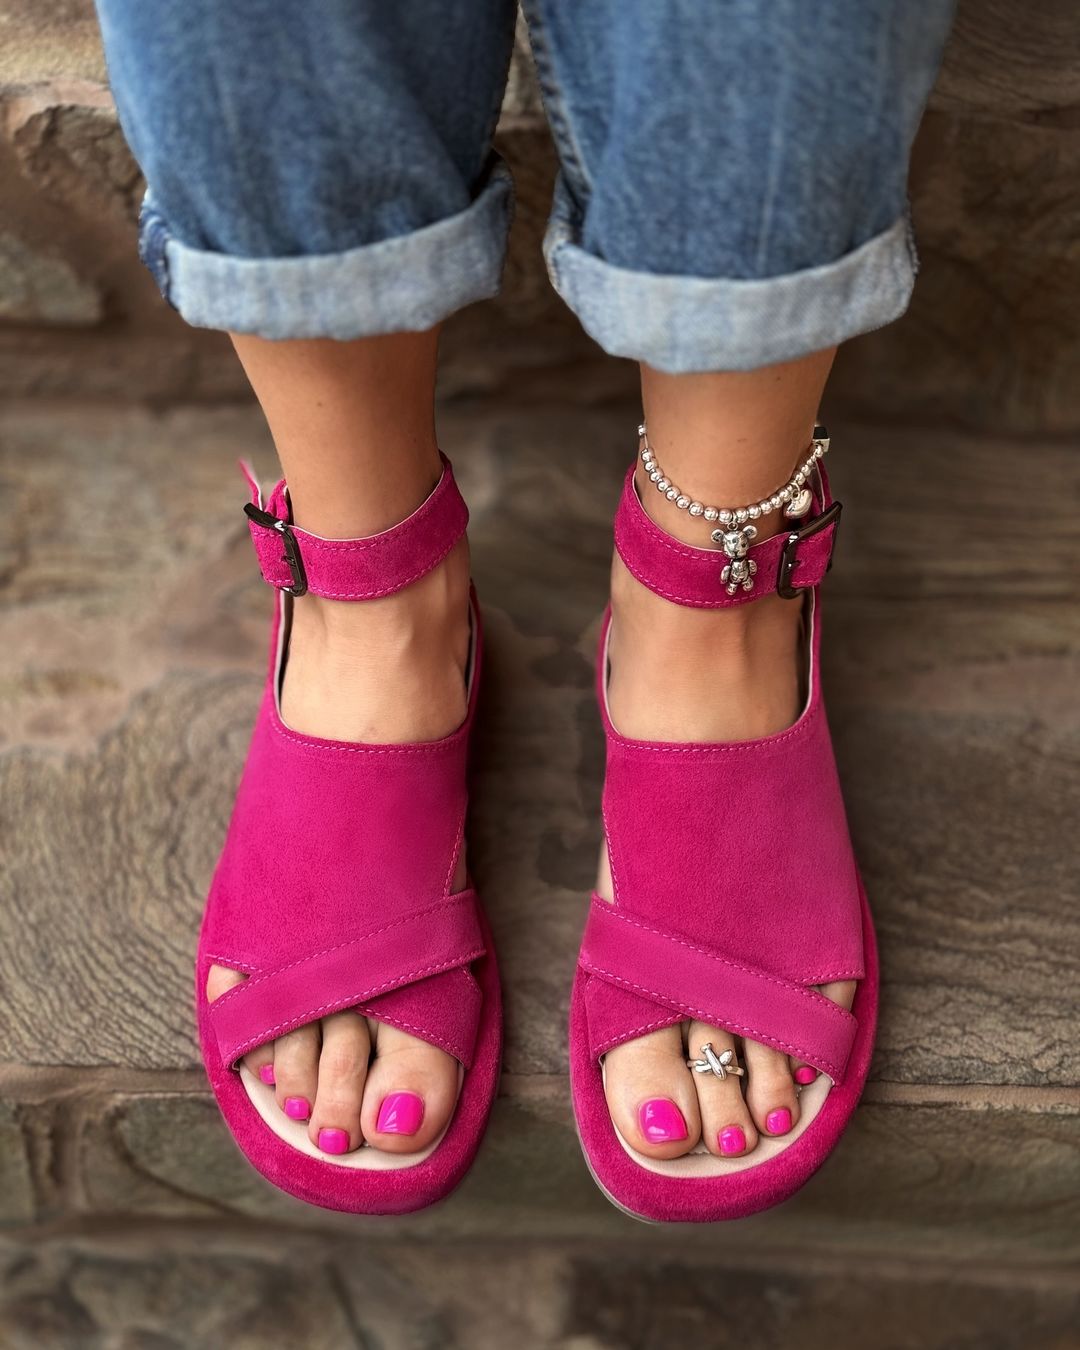 Comfortable natural suede sandals